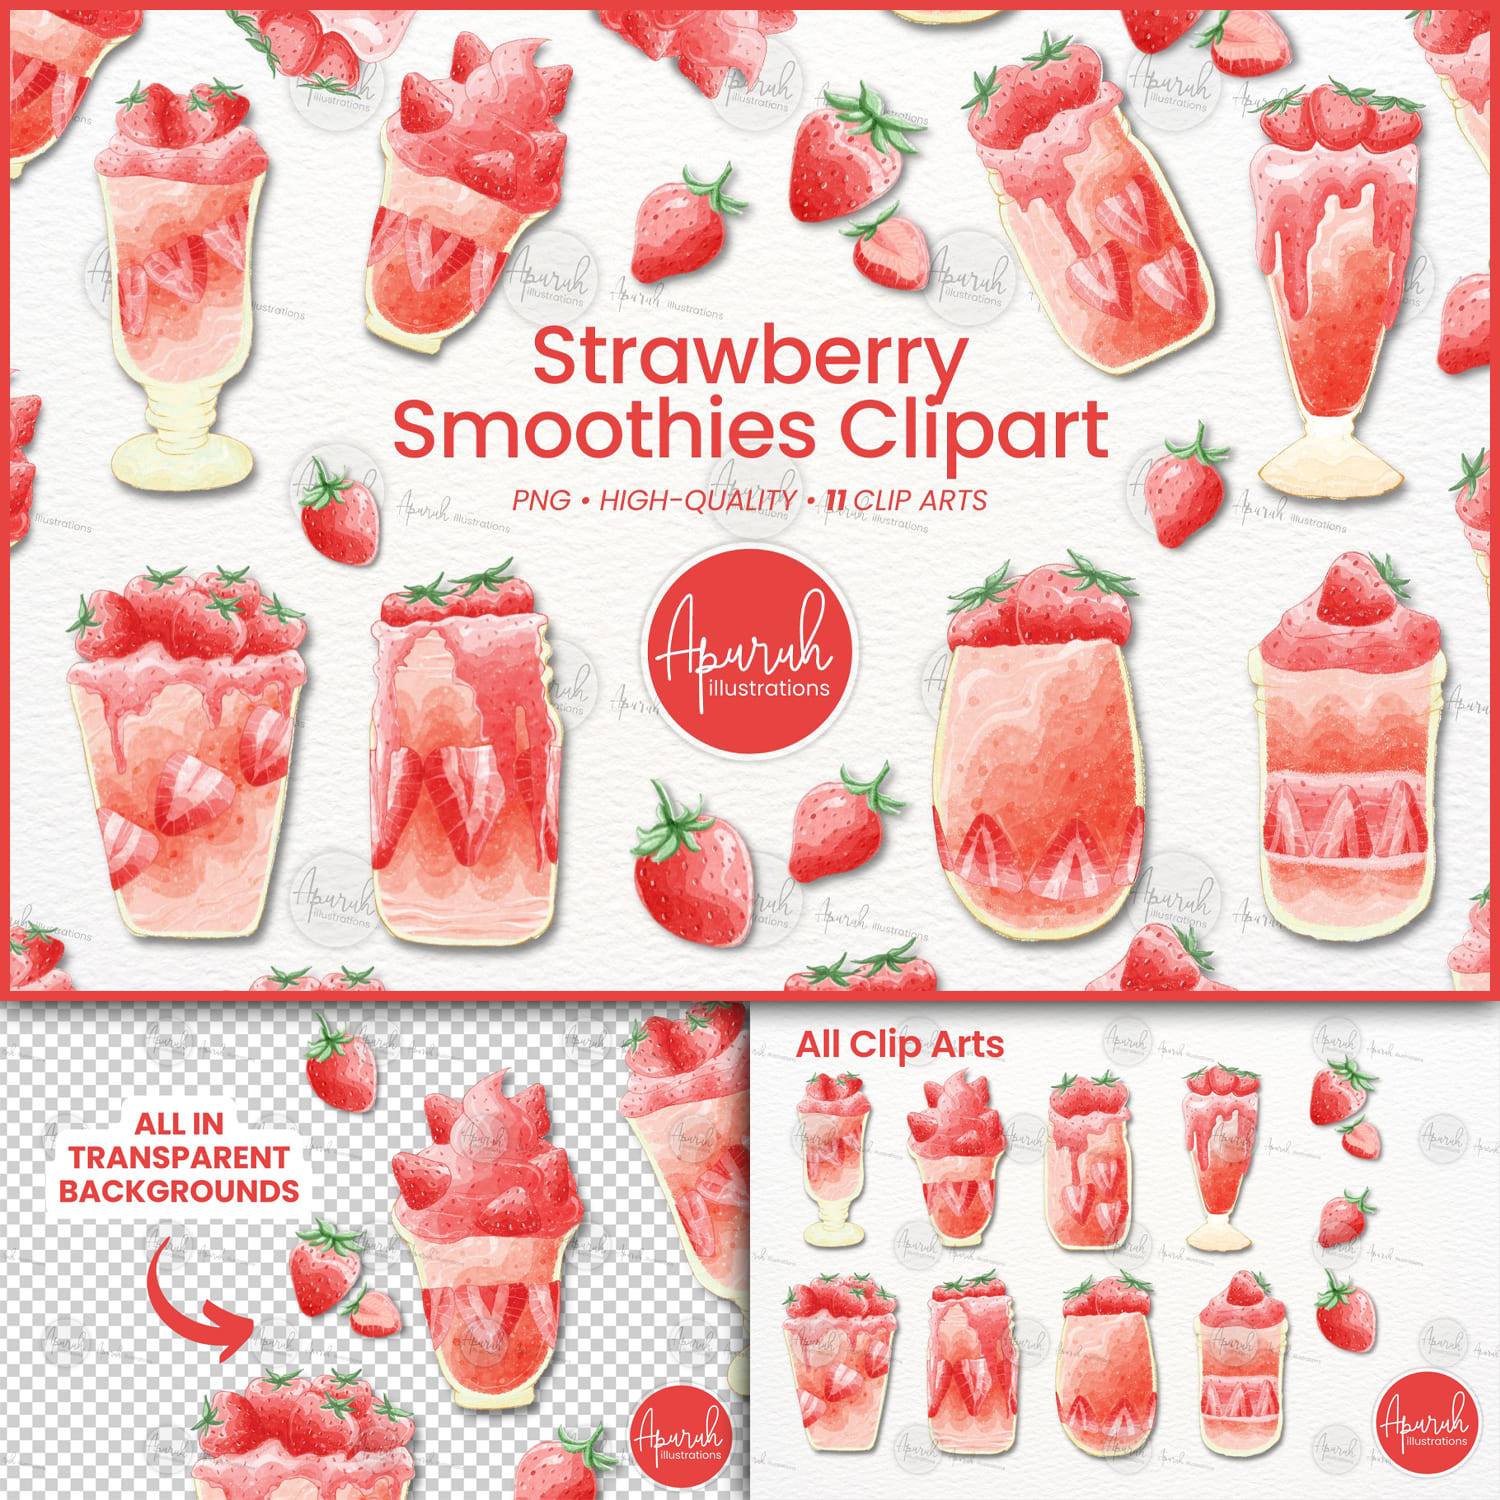 Strawberry Smoothies Watercolor Clipart - main image preview.